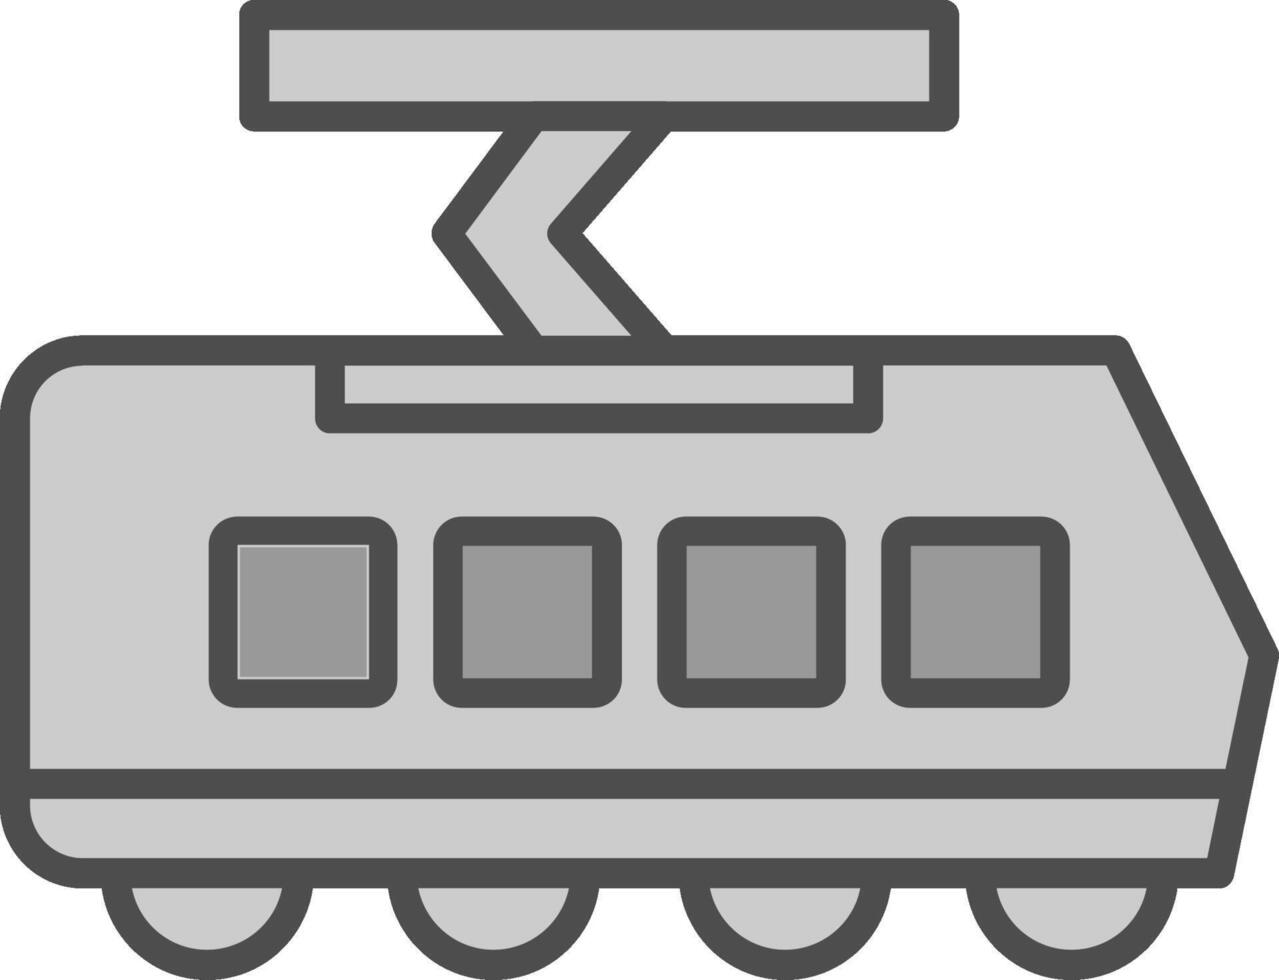 Tram Line Filled Greyscale Icon Design vector